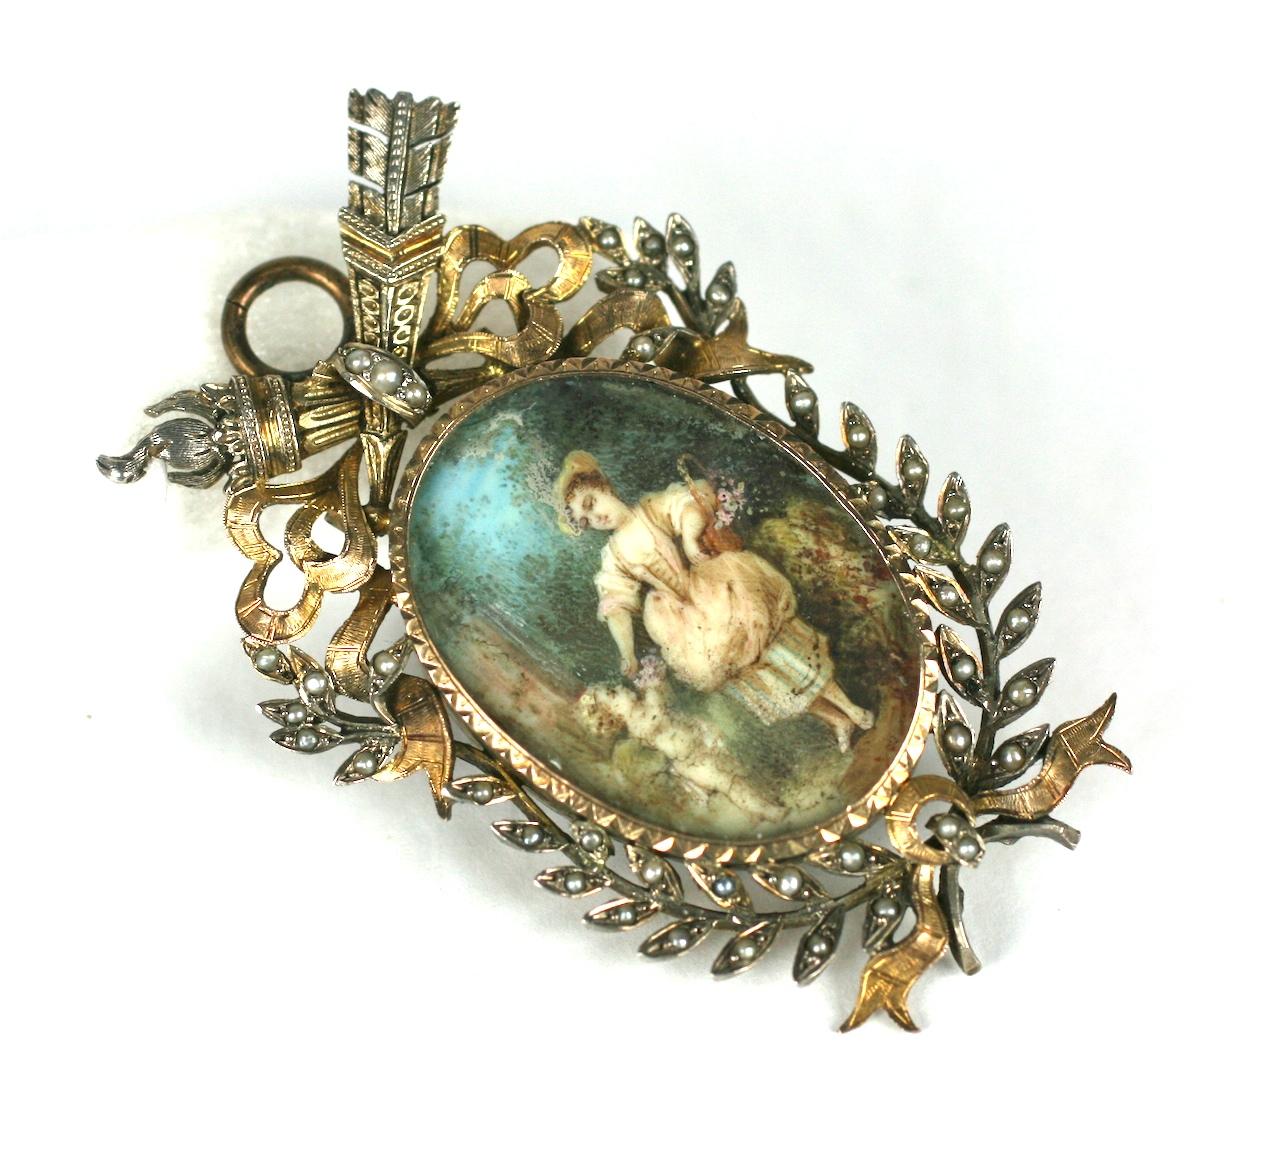 Charming 19th Century Miniature Pendant of a young woman with a cherub set in a wooded clearing, beautifully hand painted and set under glass. Extraordinary detailing in the painted miniature. 
Set in a French style period frame set with seed pearls